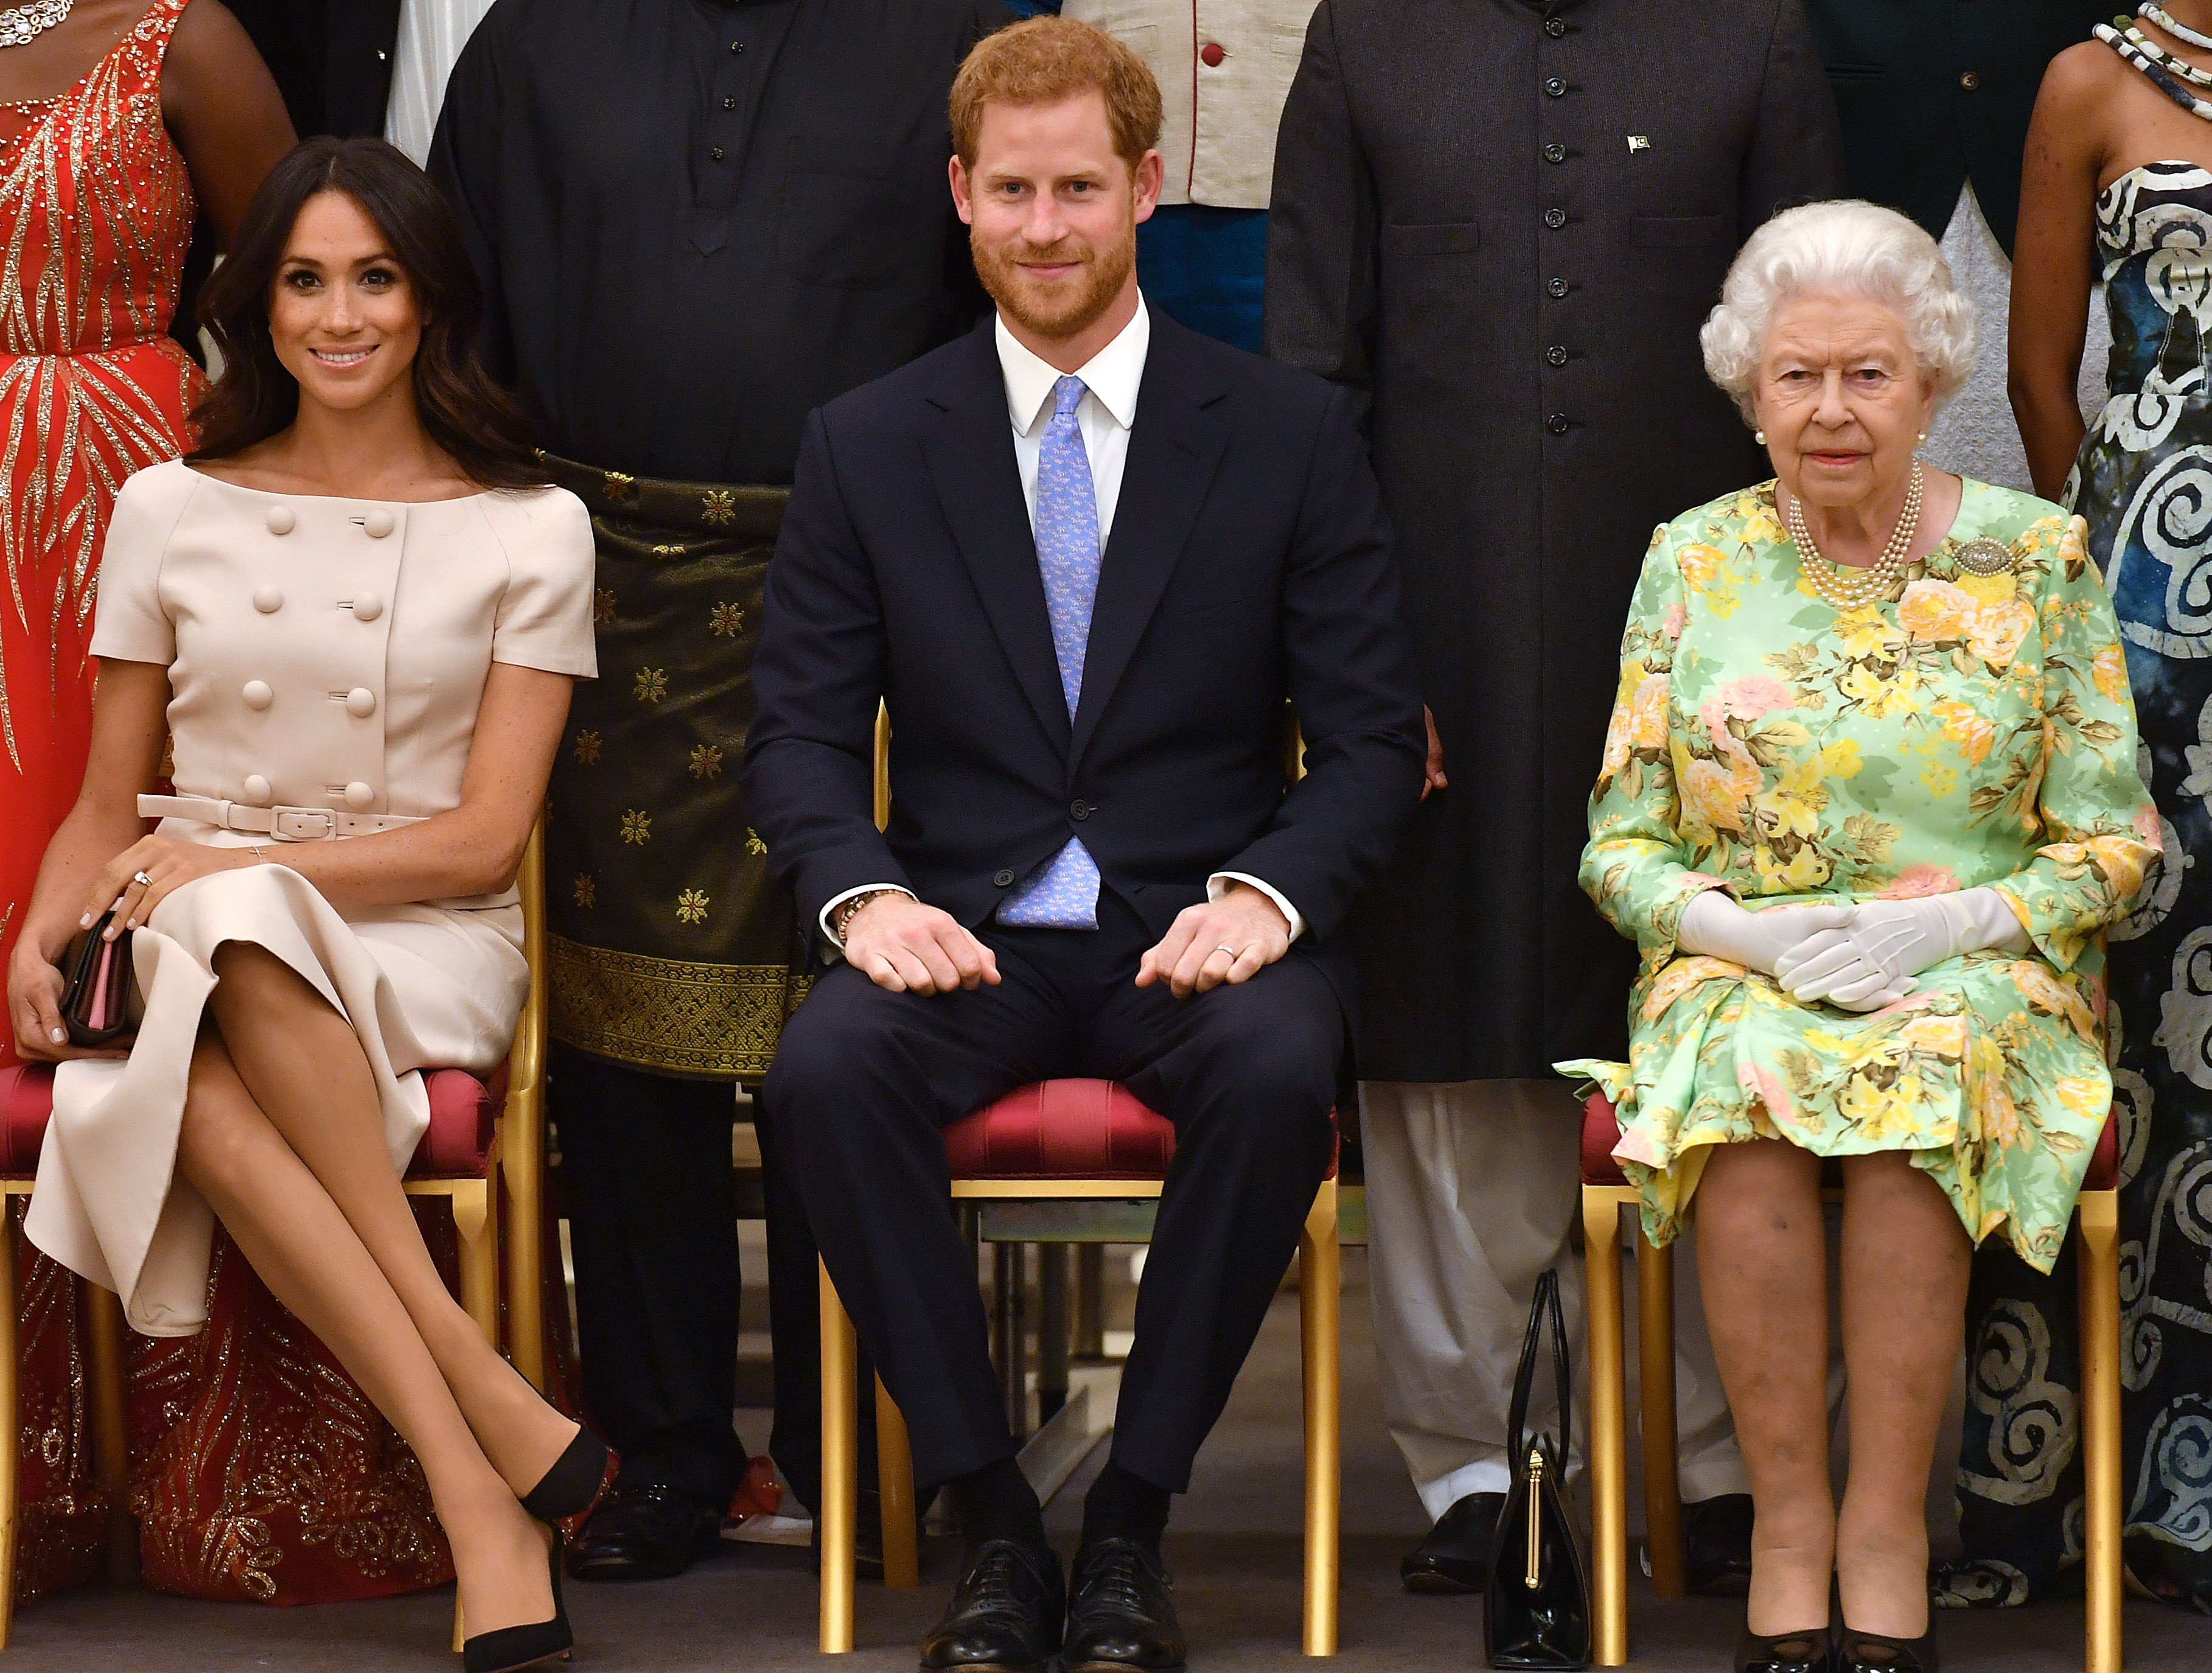 Meghan Markle, Prince Harry, and Queen Elizabeth II sitting next to each other at the Queen's Young Leaders Awards Ceremony